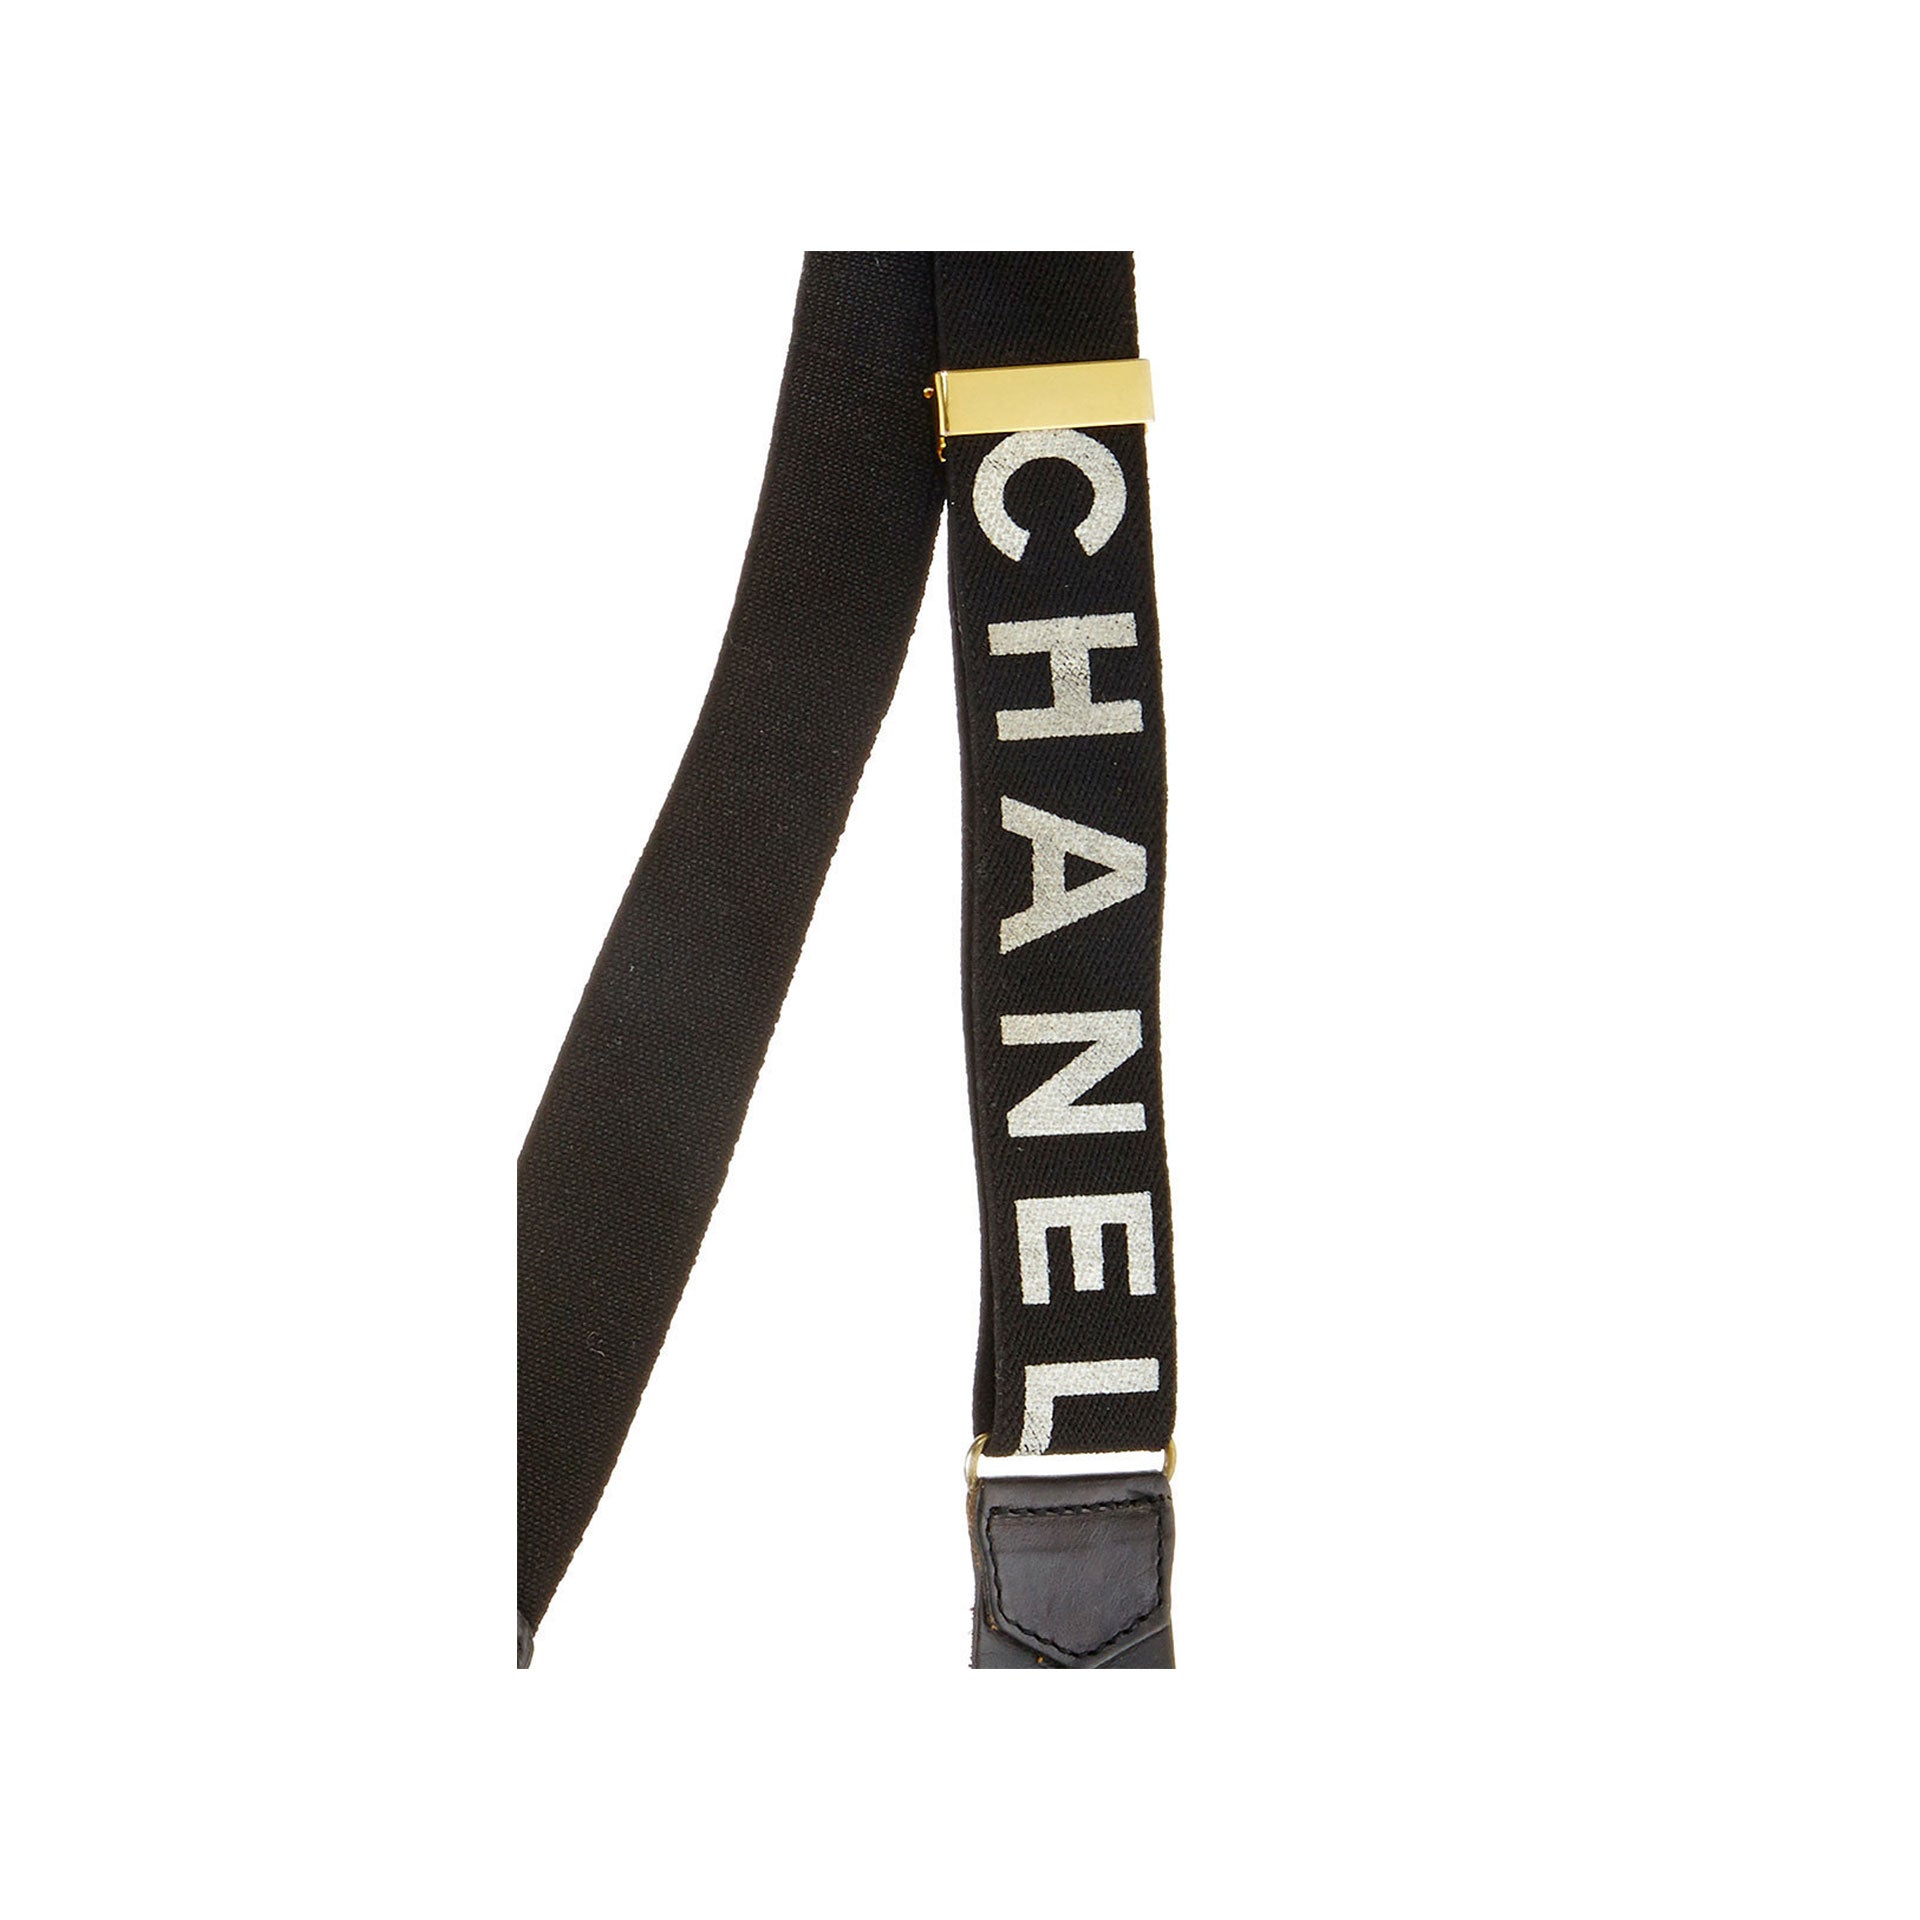 CHANEL Logo Used Suspender Black Sewing Elastic Leather Vintage Auth #CJ416  S